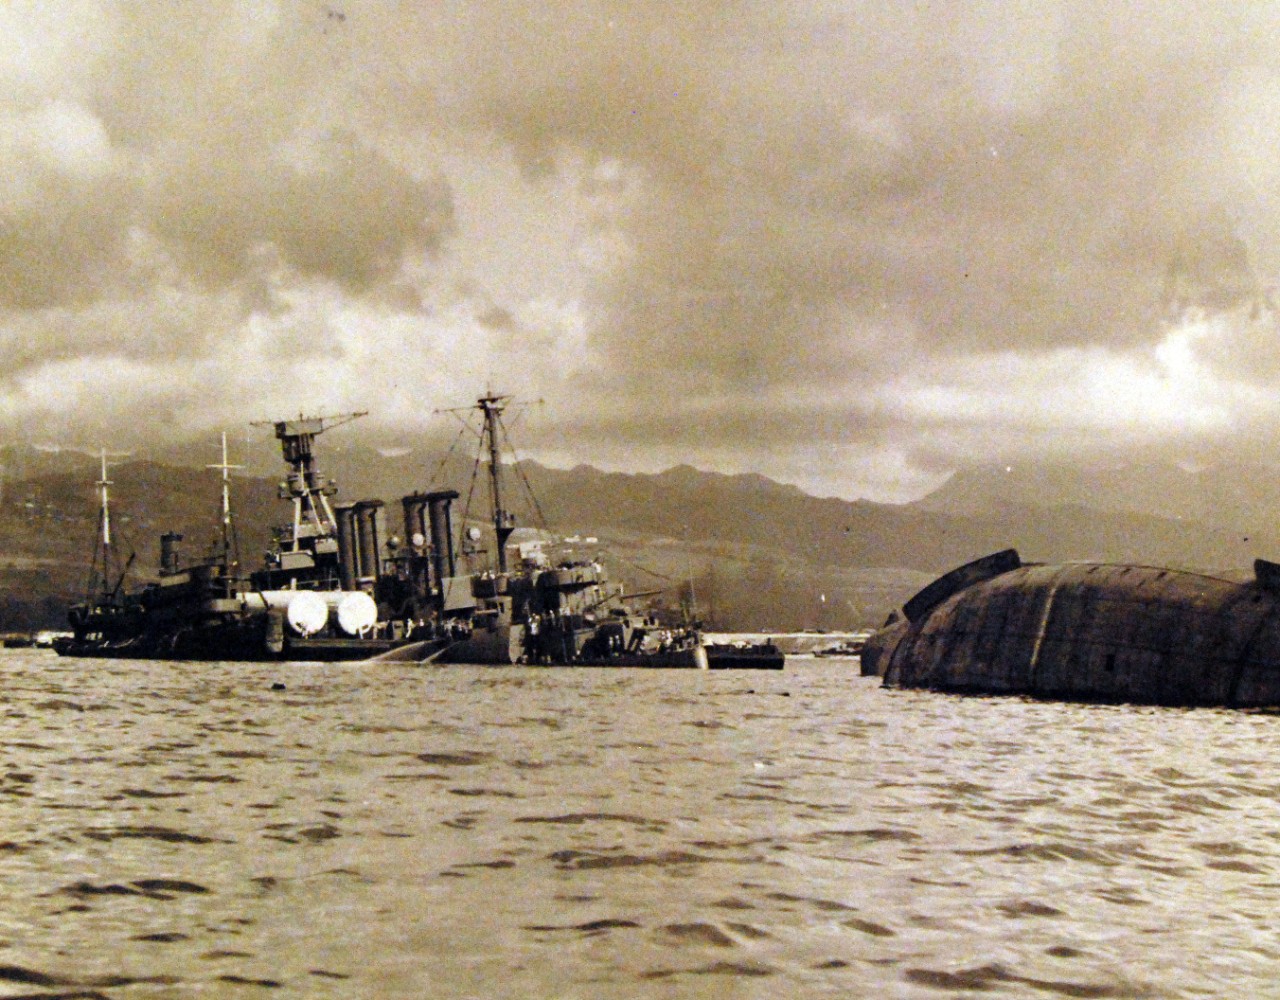 80-G-32742:   Japanese Attack on Pearl Harbor, December 7, 1941.   The capsized USS Utah (AG 16) and USS Raleigh (CL 7) are shown after the attack. Official U.S. Navy photograph, now in the collections of the National Archives. (9/9/2015).